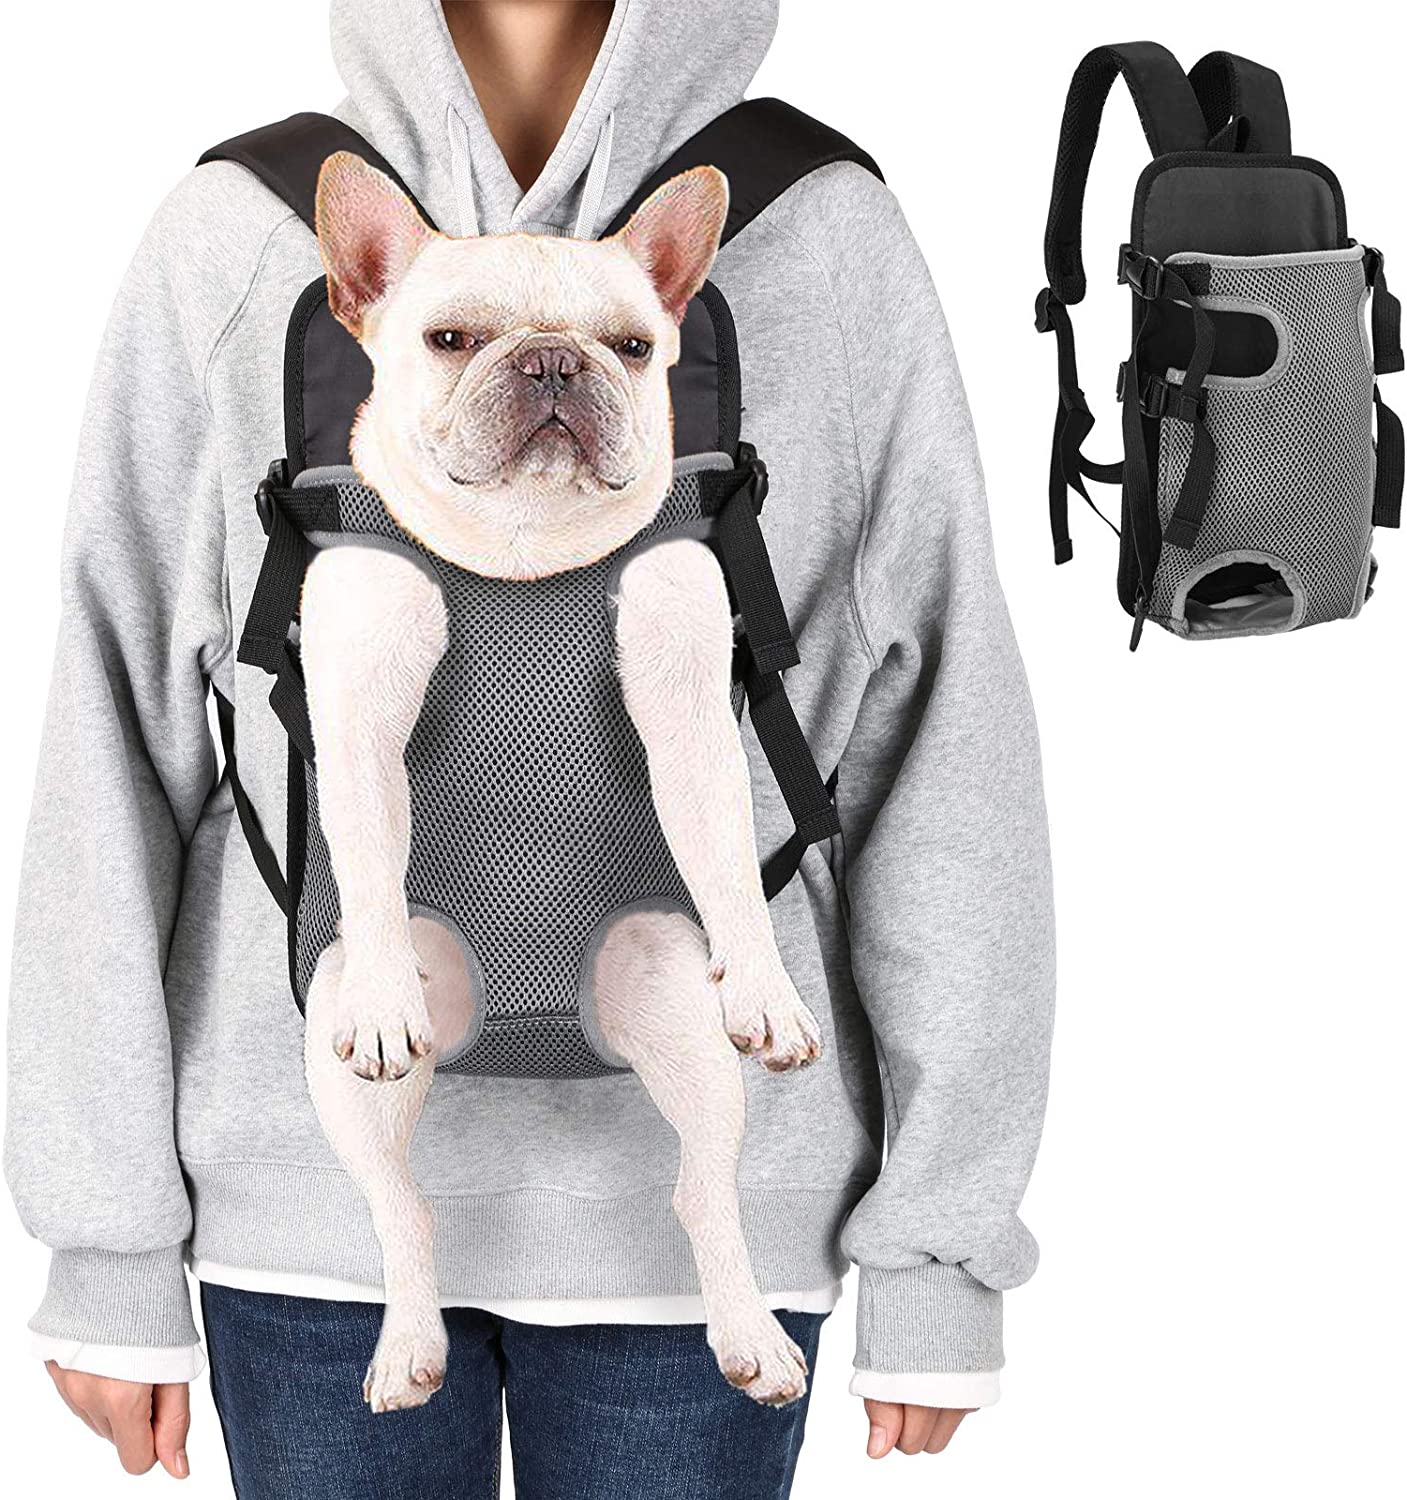 Are Dog Carriers Bad For Dogs Backpack